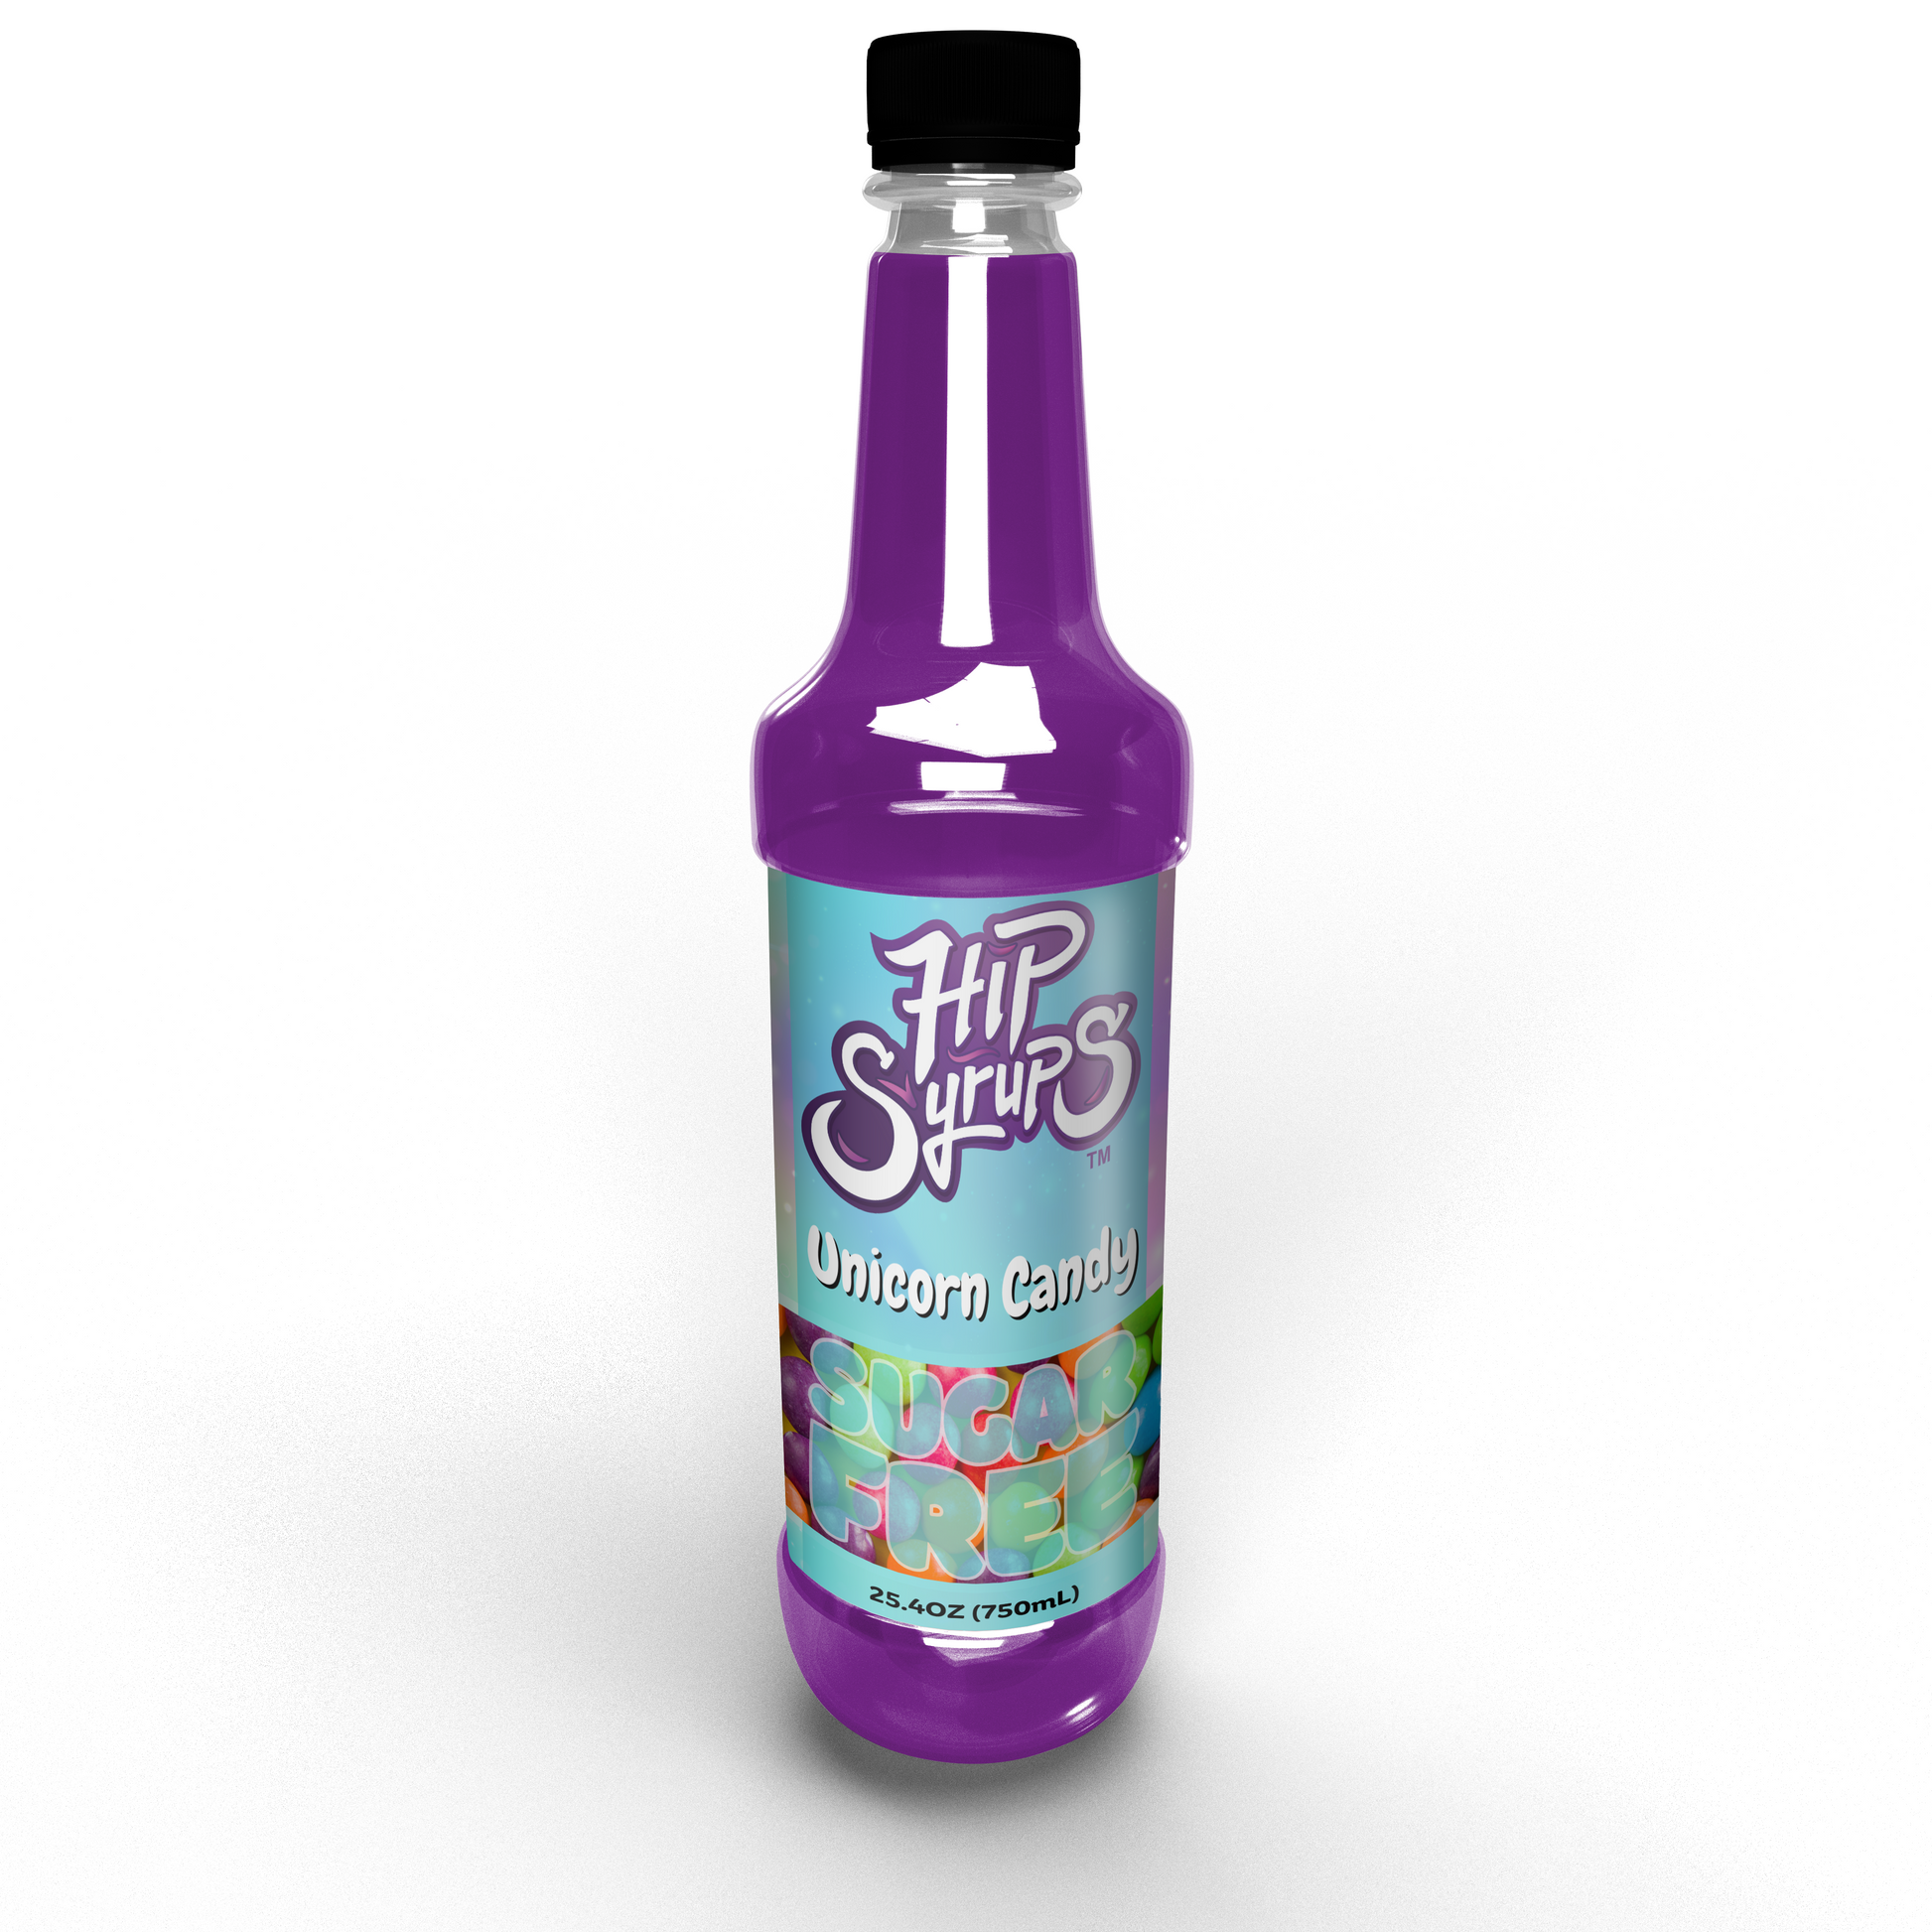 Sugar Free Simple Syrups designed for Unicorn Candy, Water Flavor, Bubble Tea, Boba Tea, Cocktails, Sugar Free